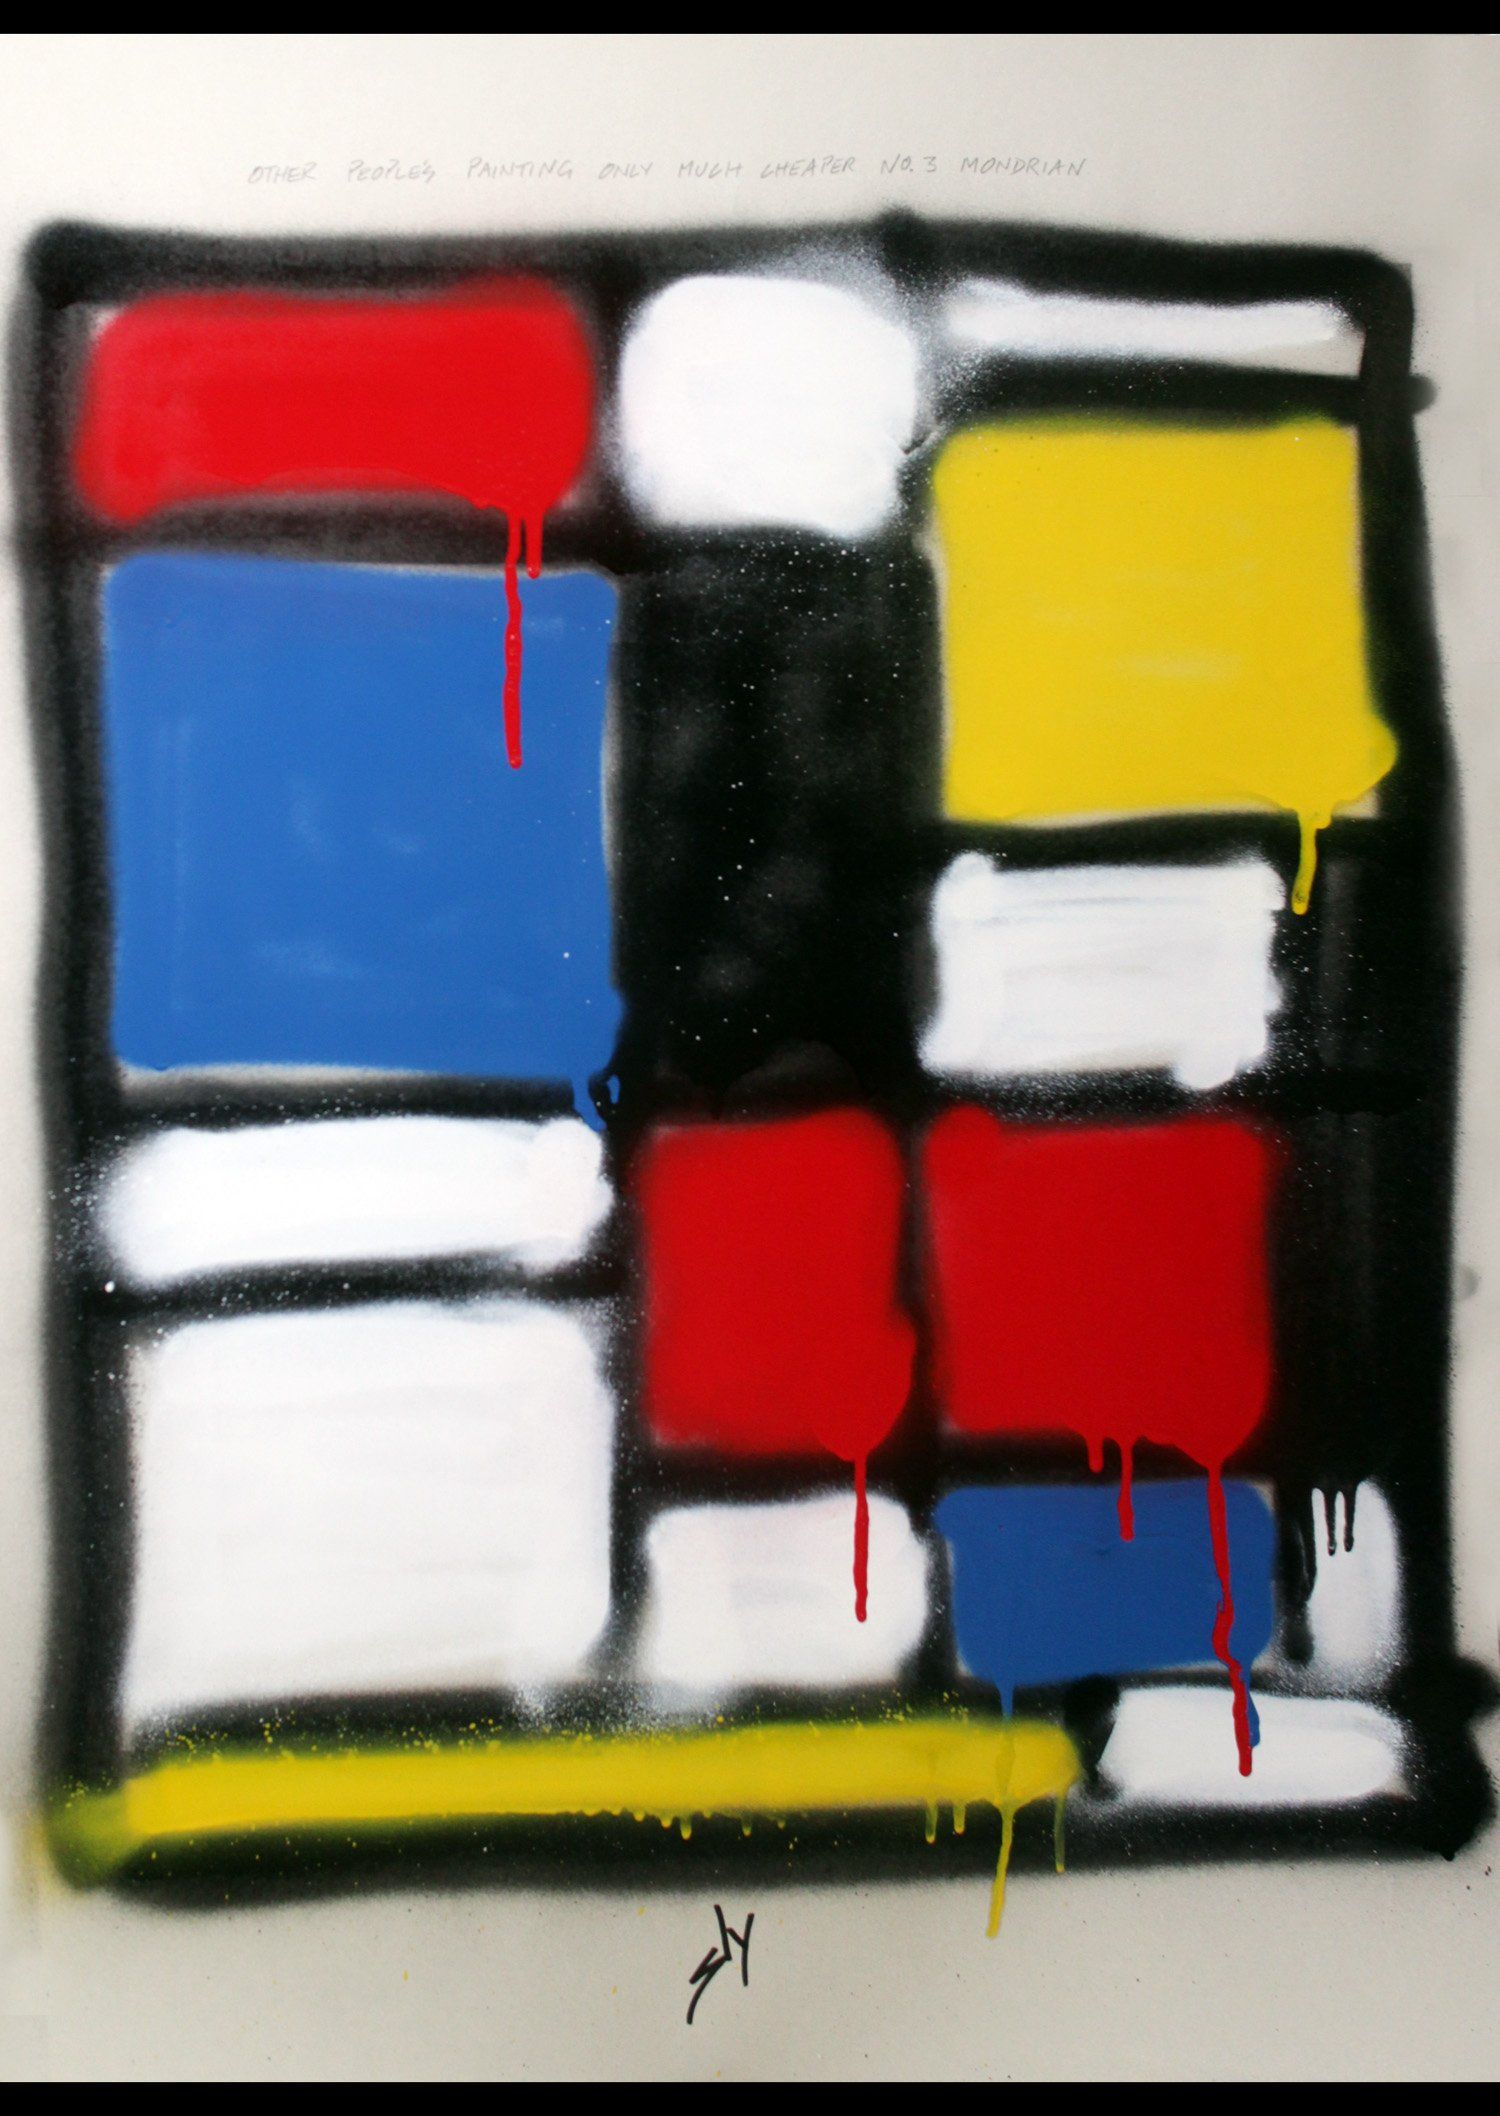 Urban pop art by Sly: other 3 Mondrian